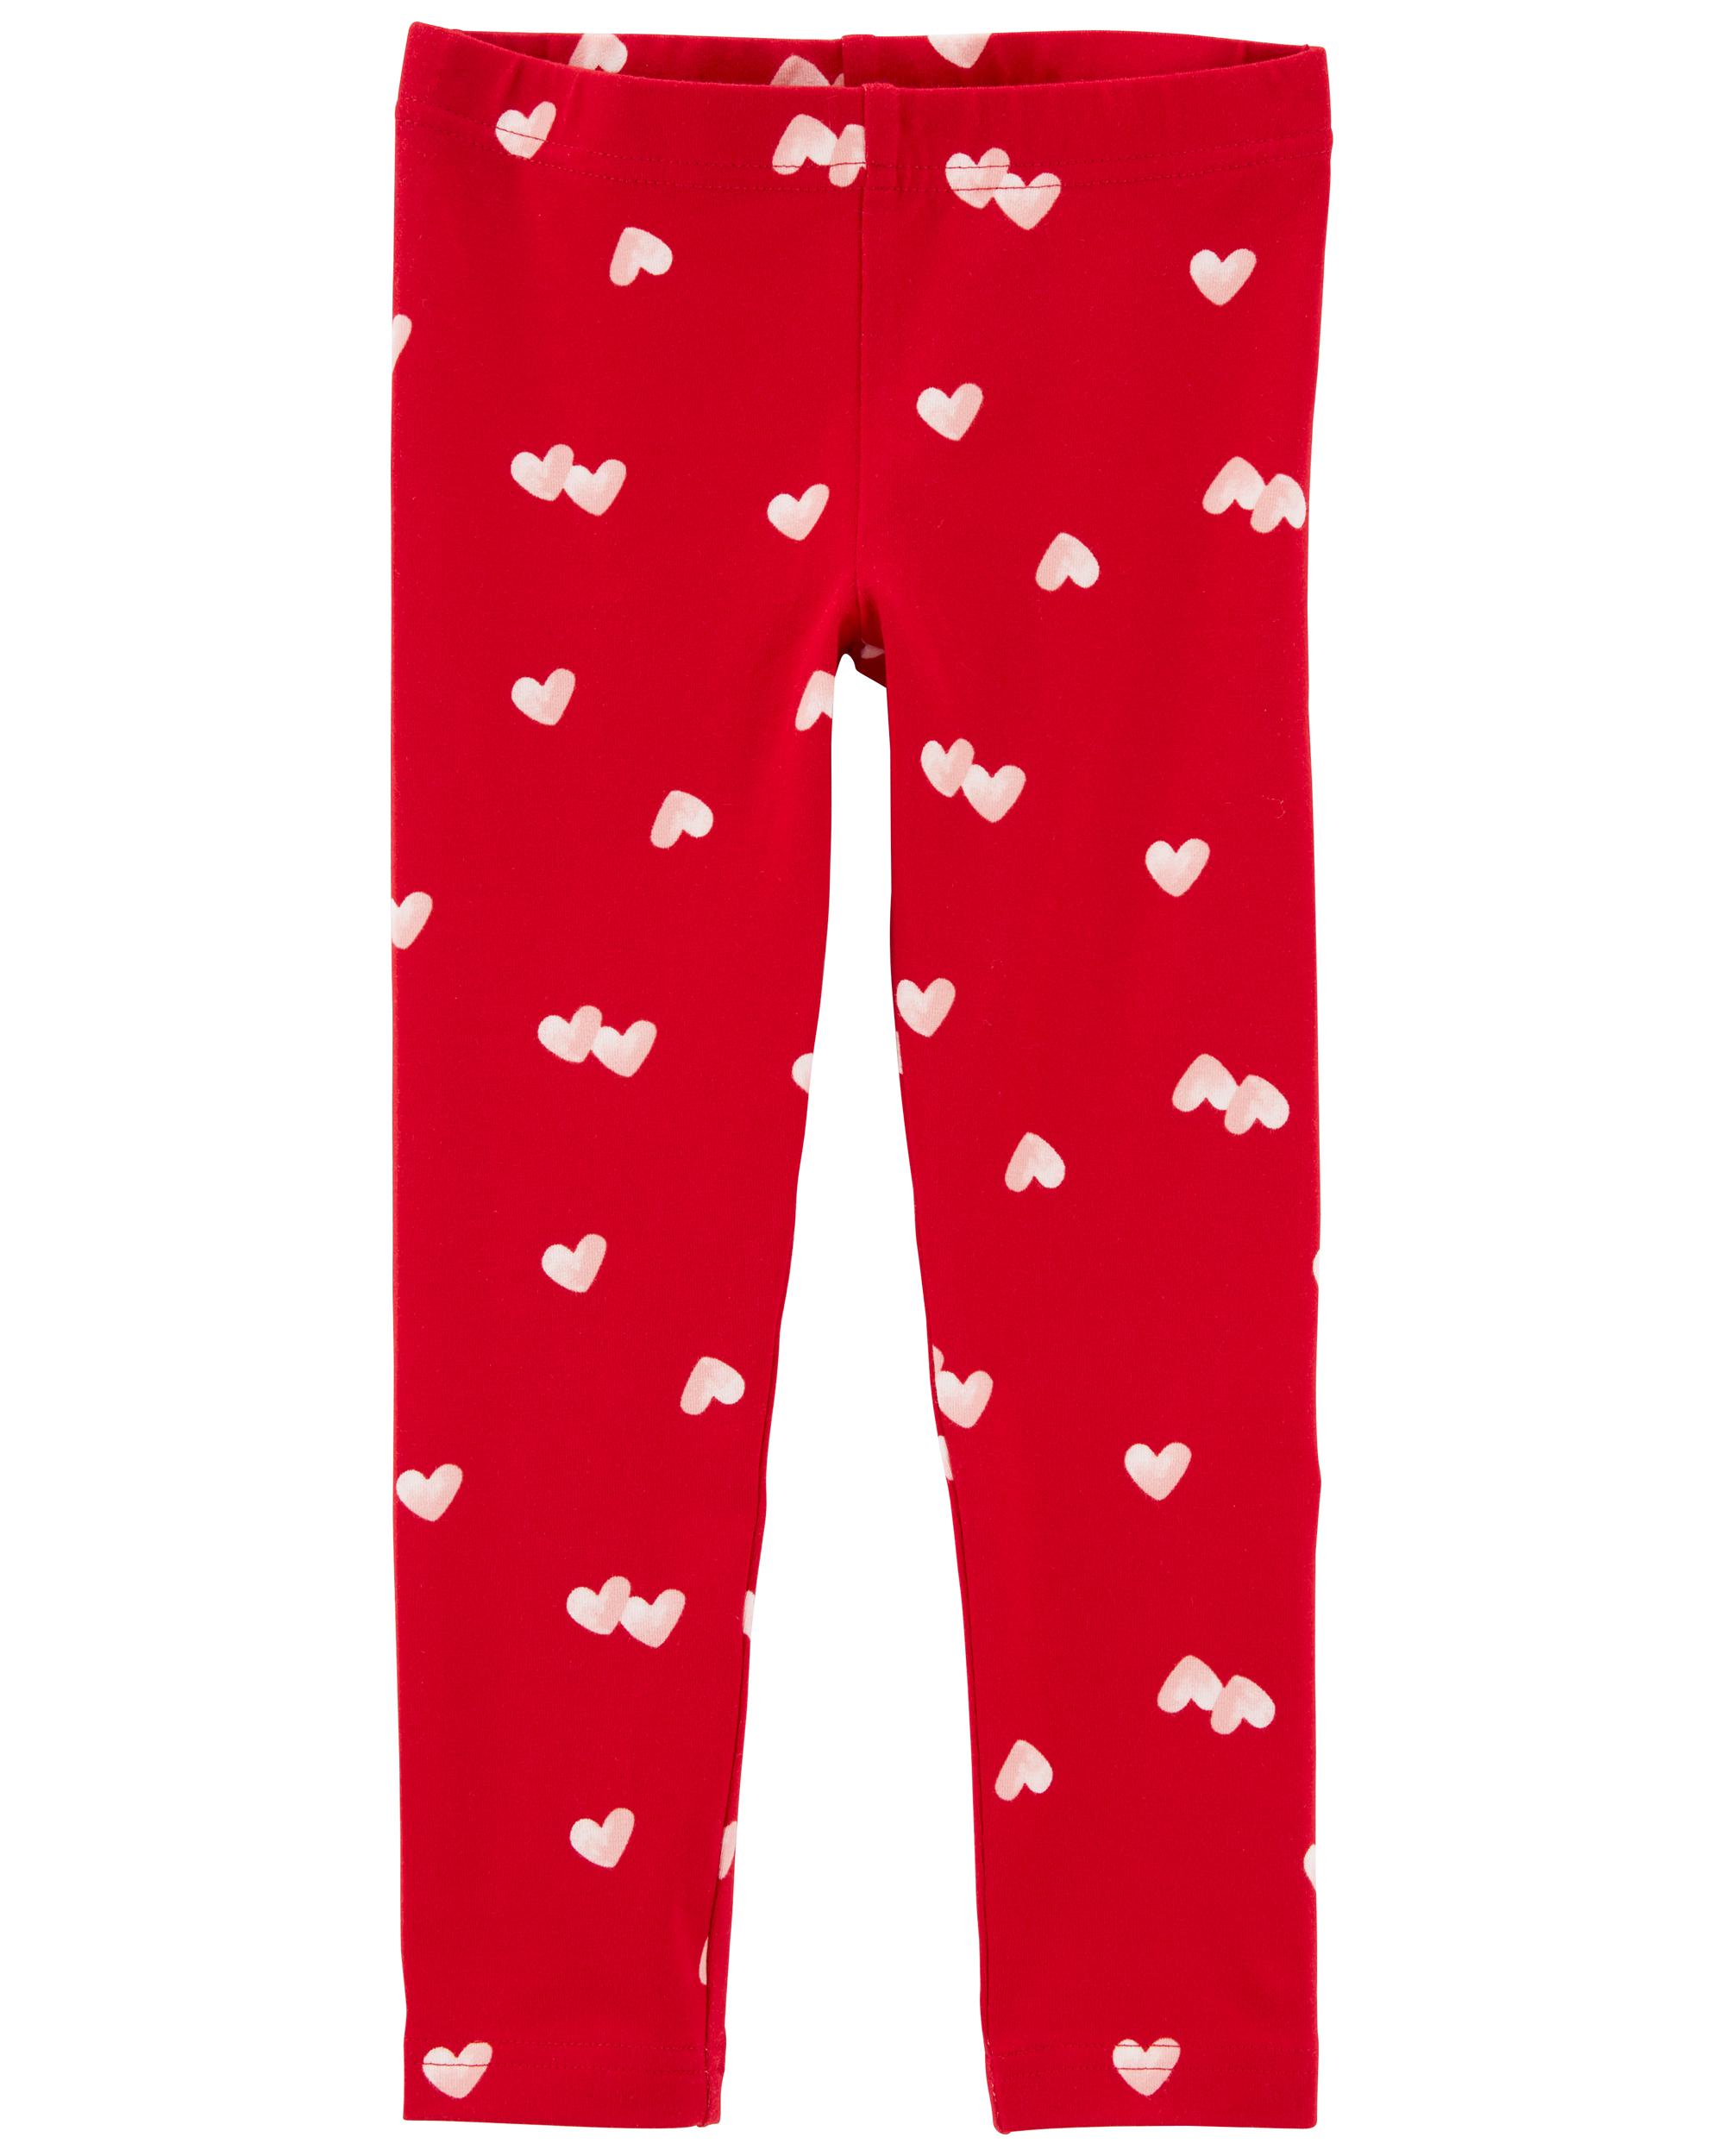 Girls Pink Red & White Hearts Valentines Day Leggings Pants X-Large (14/16)